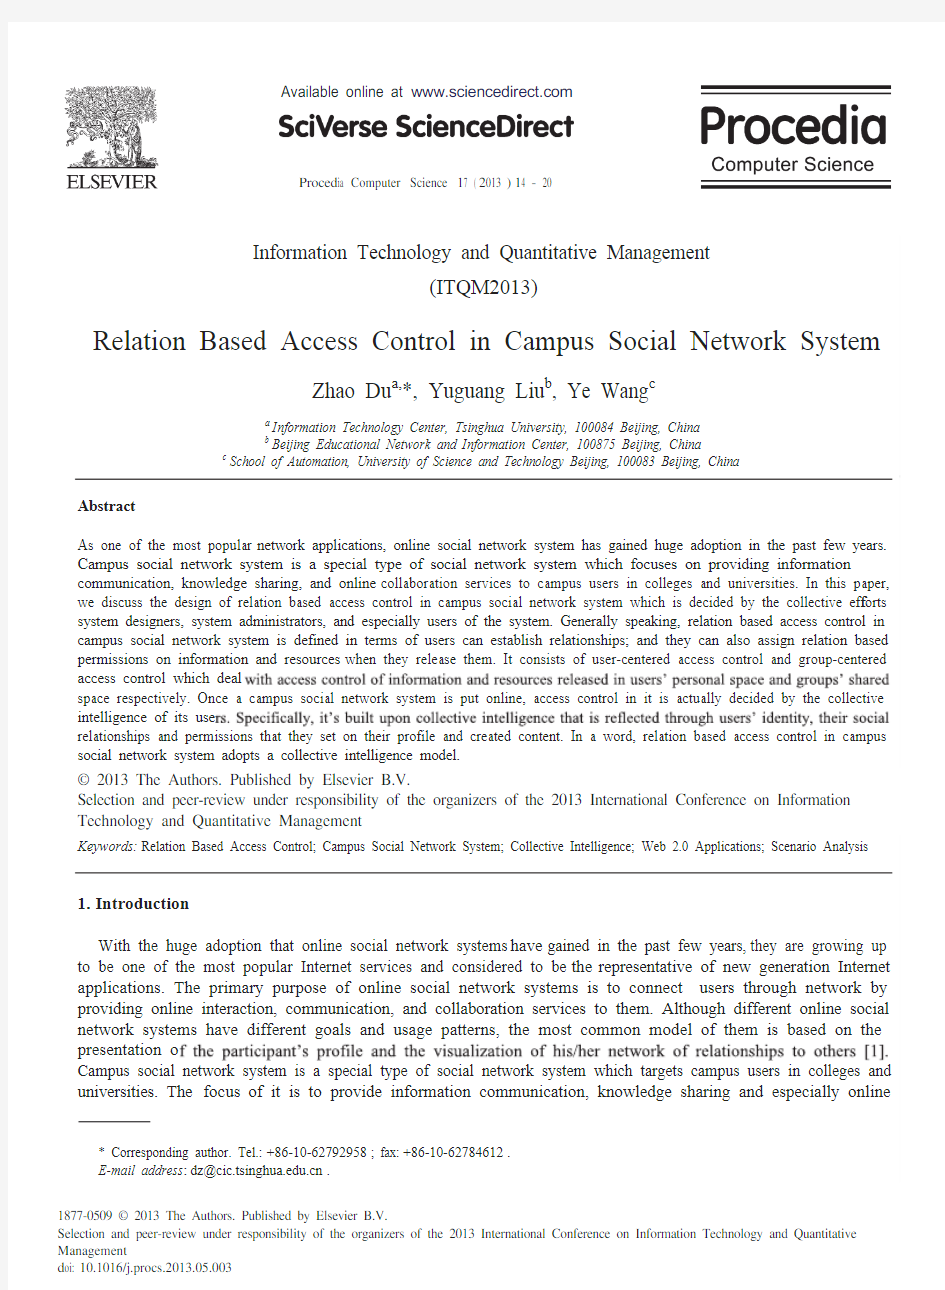 Relation Based Access Control in Campus Social Network System